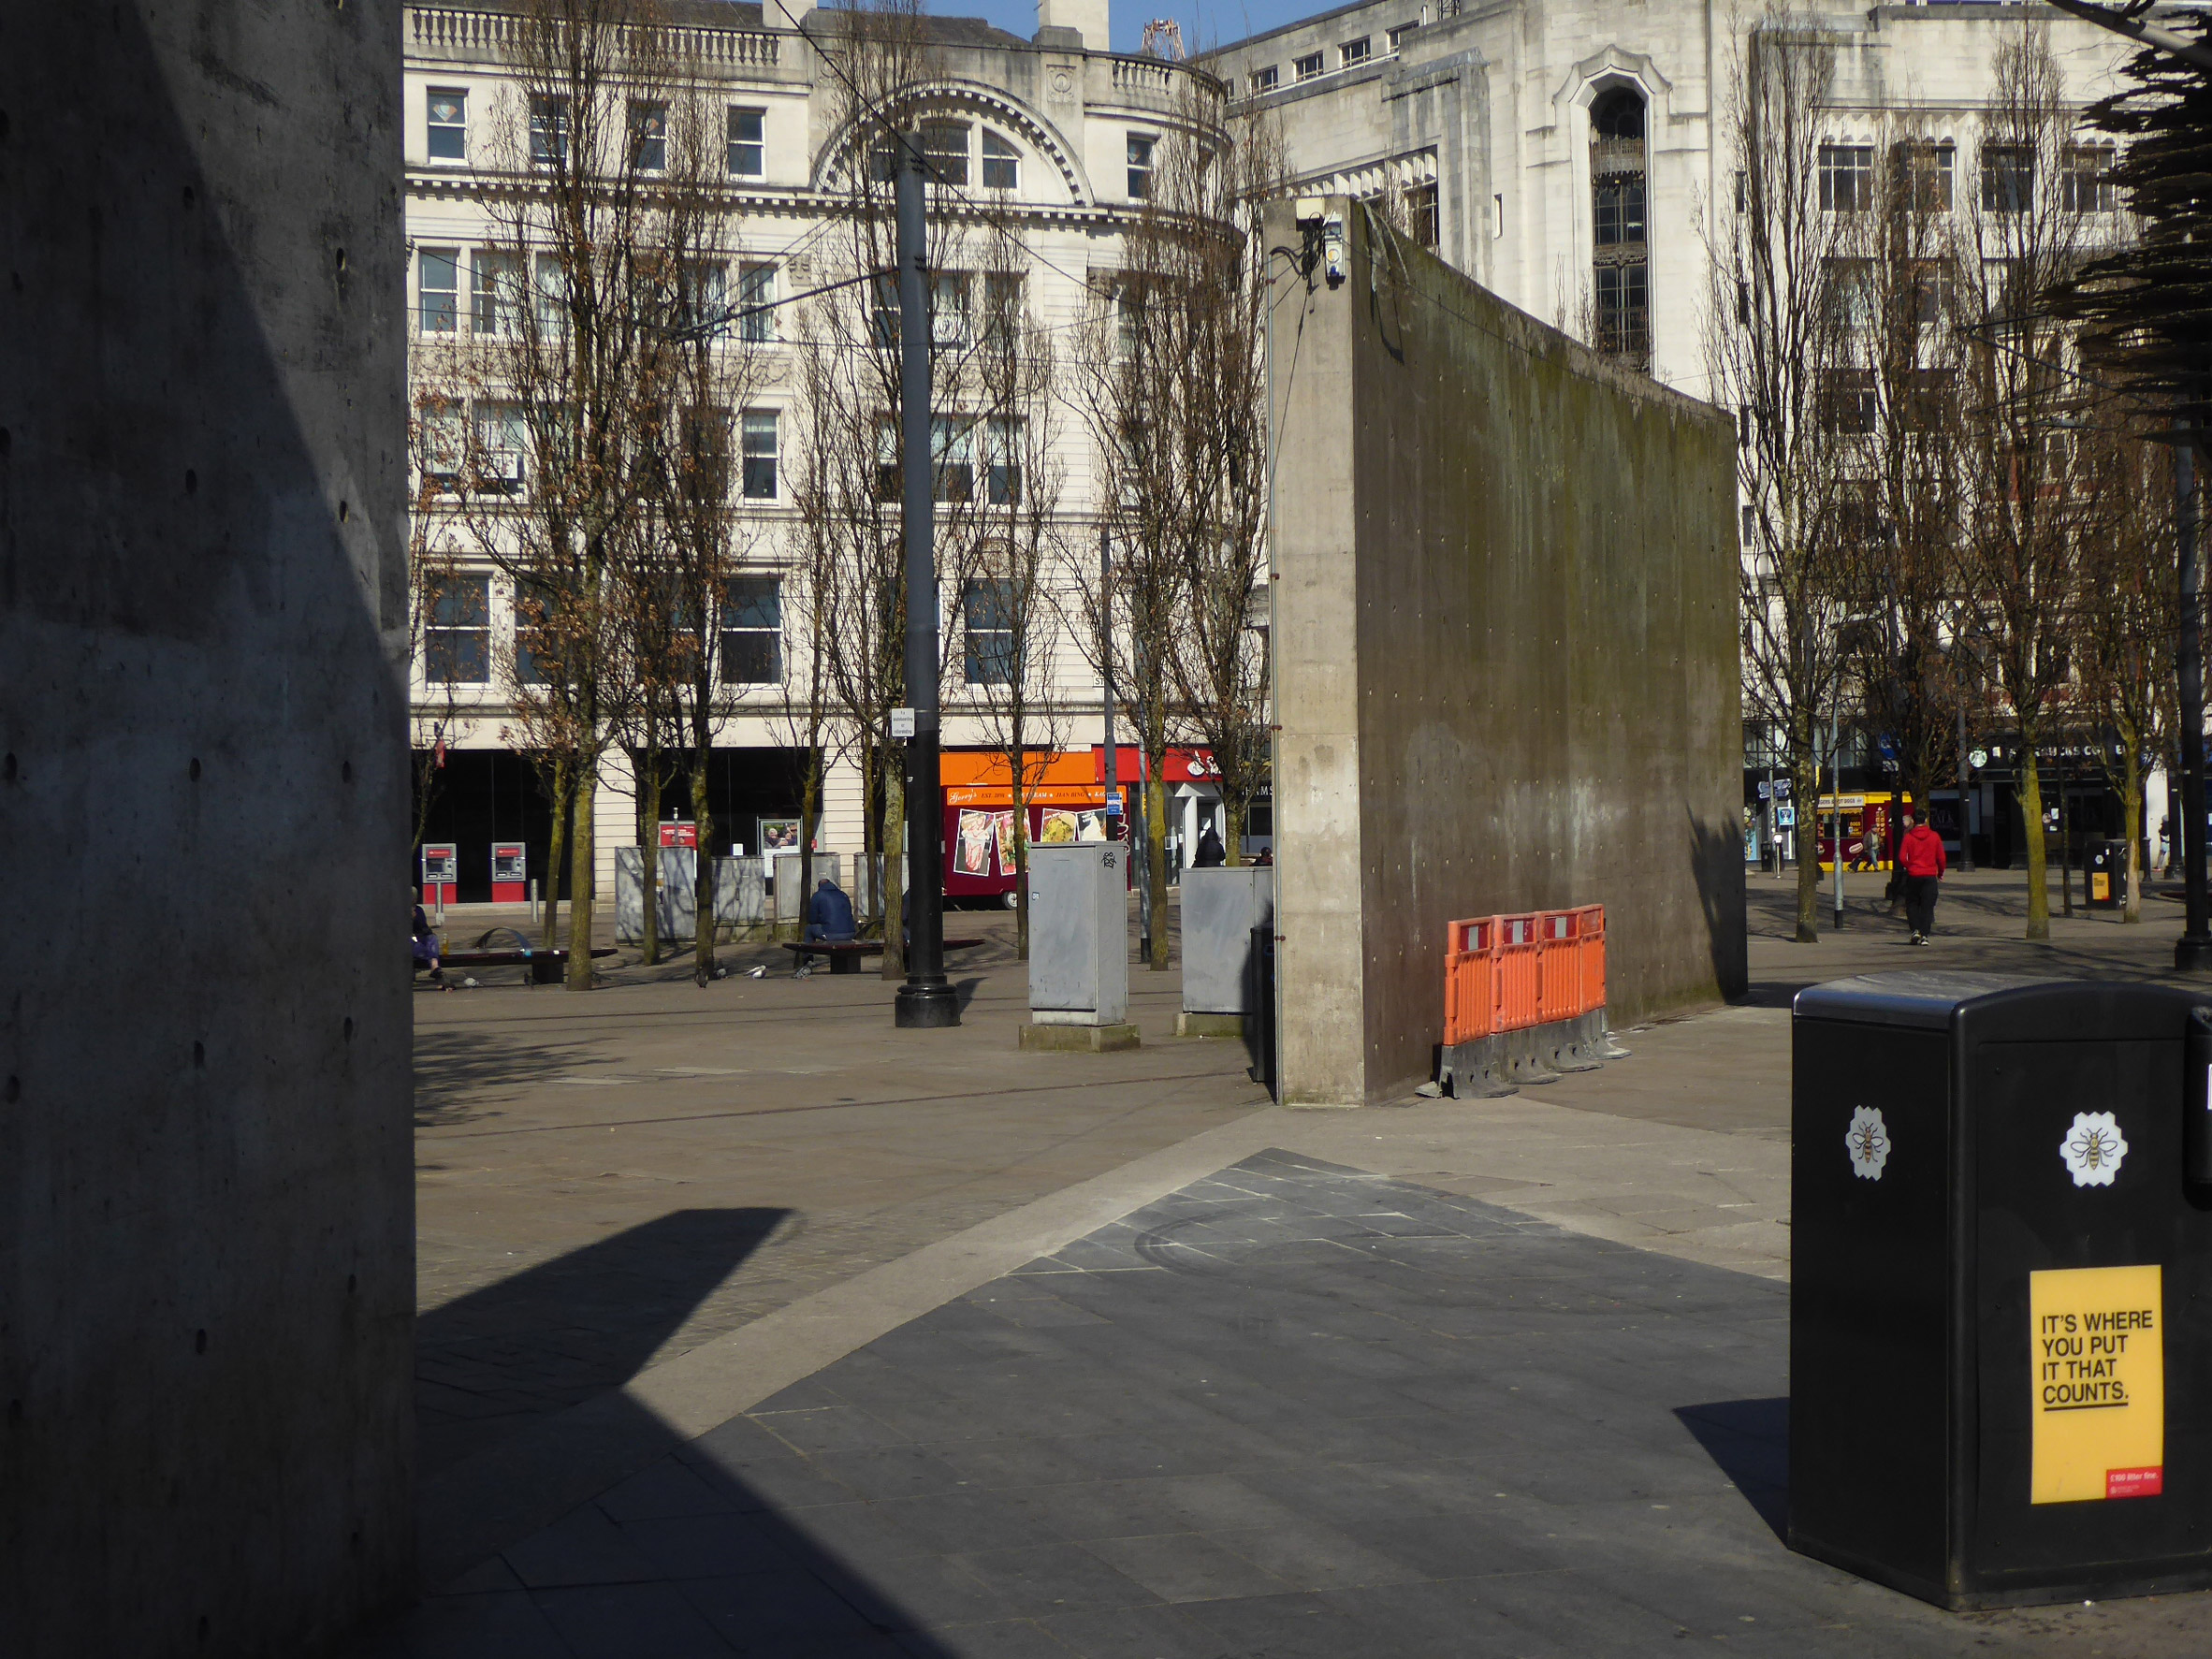 Tadao Ando's wall in Piccadilly Gardens